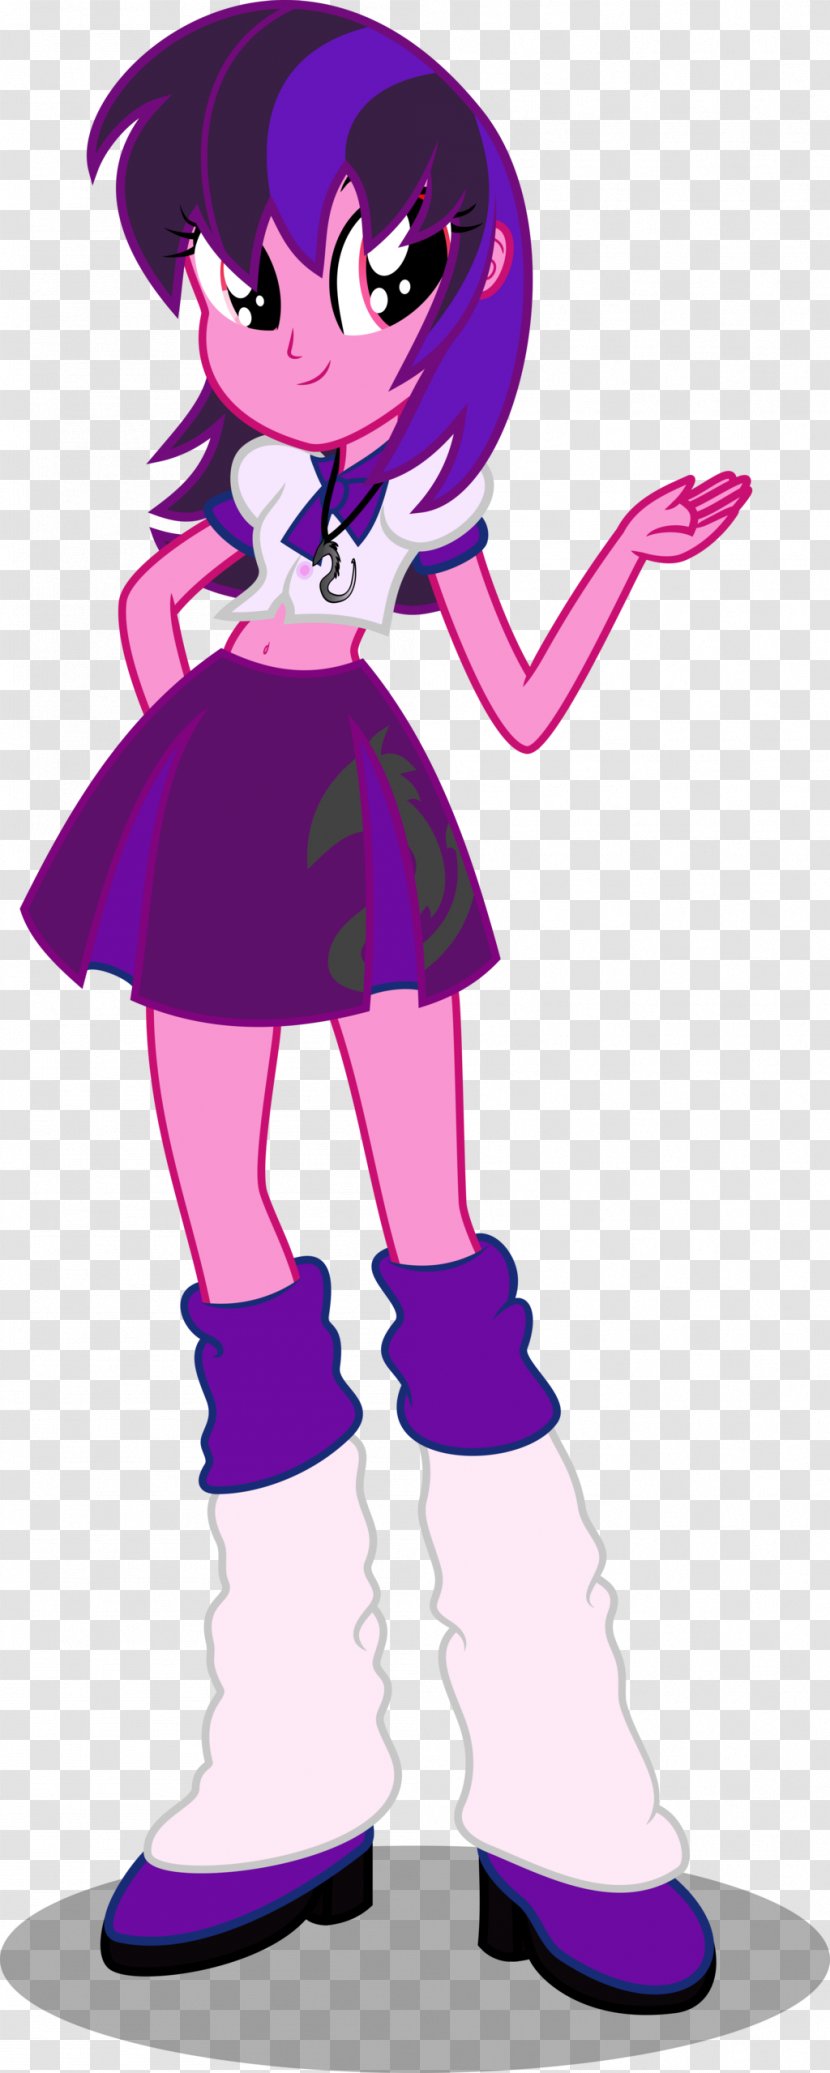 Twilight Sparkle Rarity Applejack My Little Pony: Equestria Girls - Outie Belly Button Transparent PNG